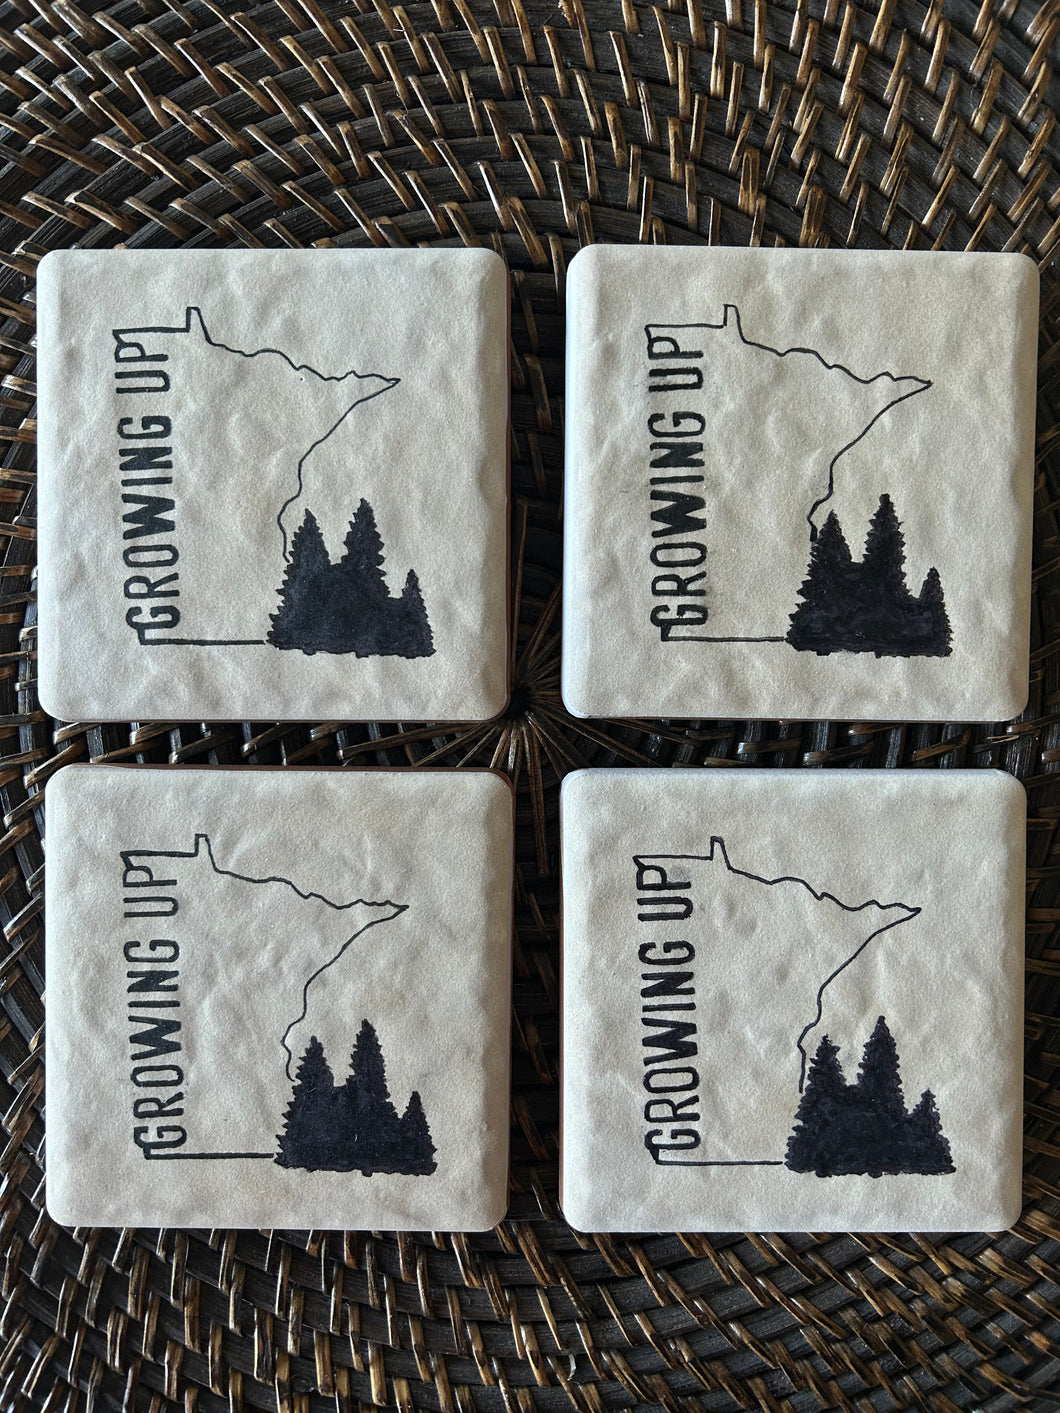 Growing up Minnesota Ceramic Coaster set: Featuring Mature Pine trees and Young Pine Tree